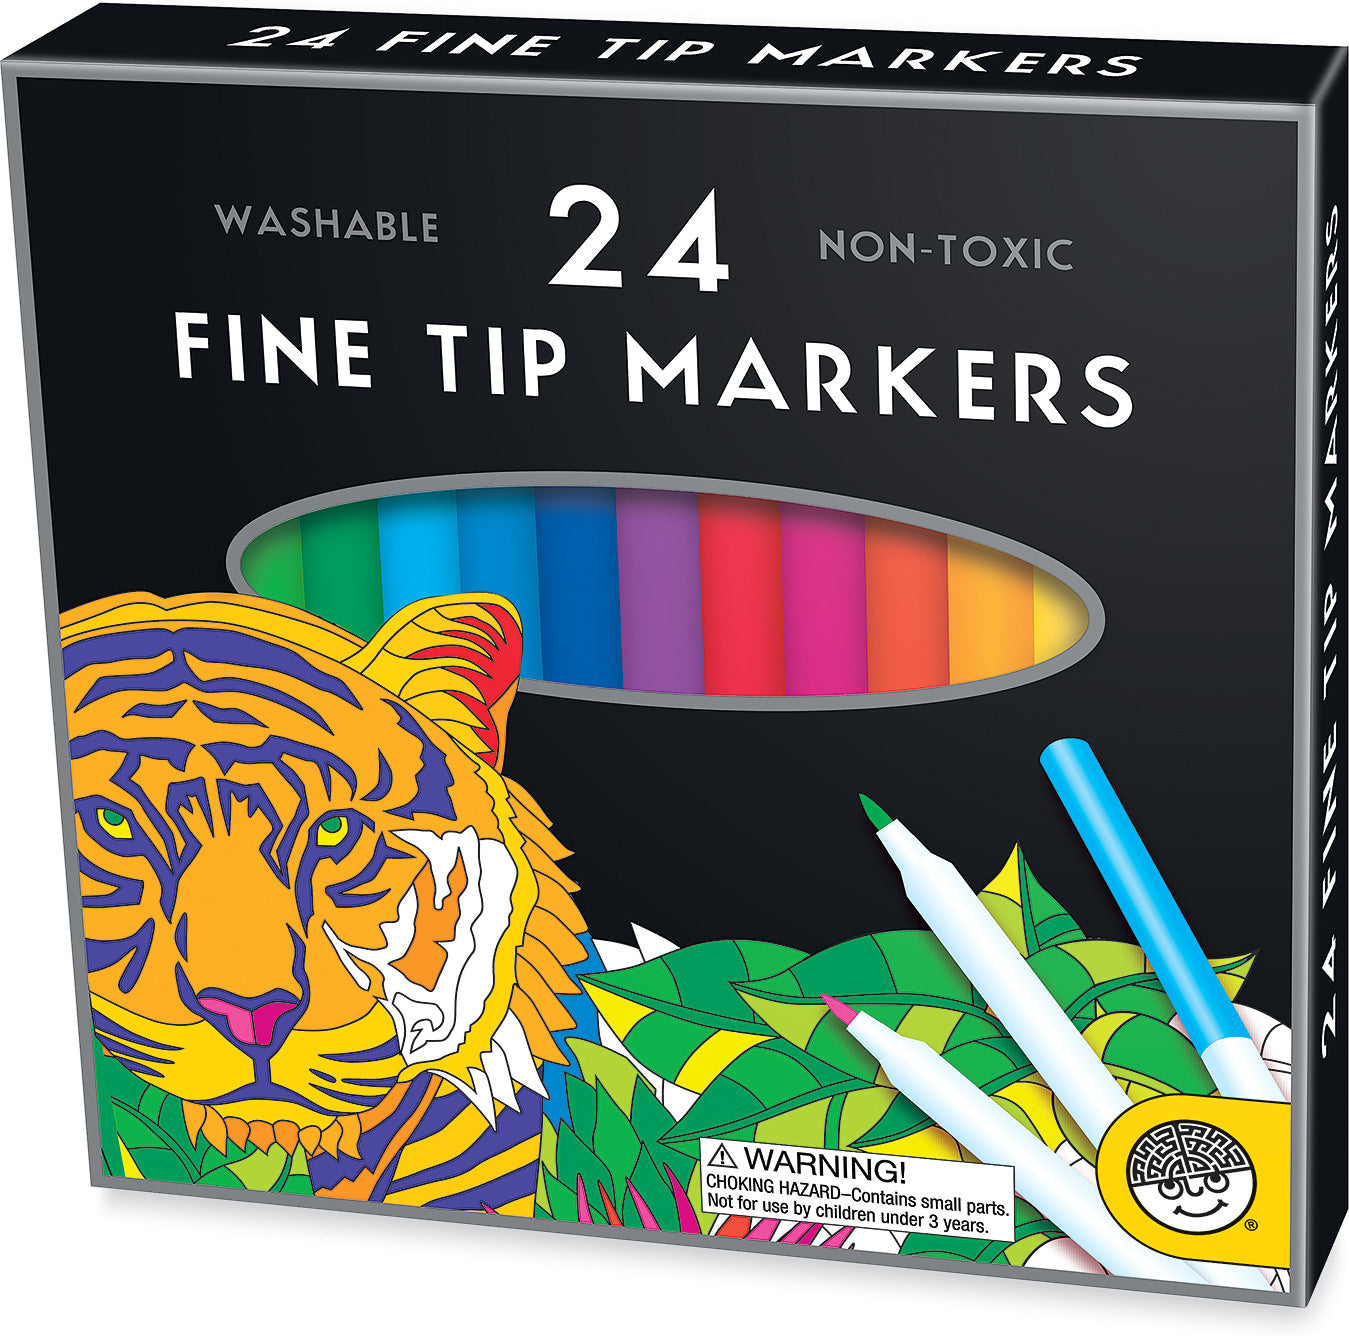 WASHABLE FINE TIP MARKERS (24)